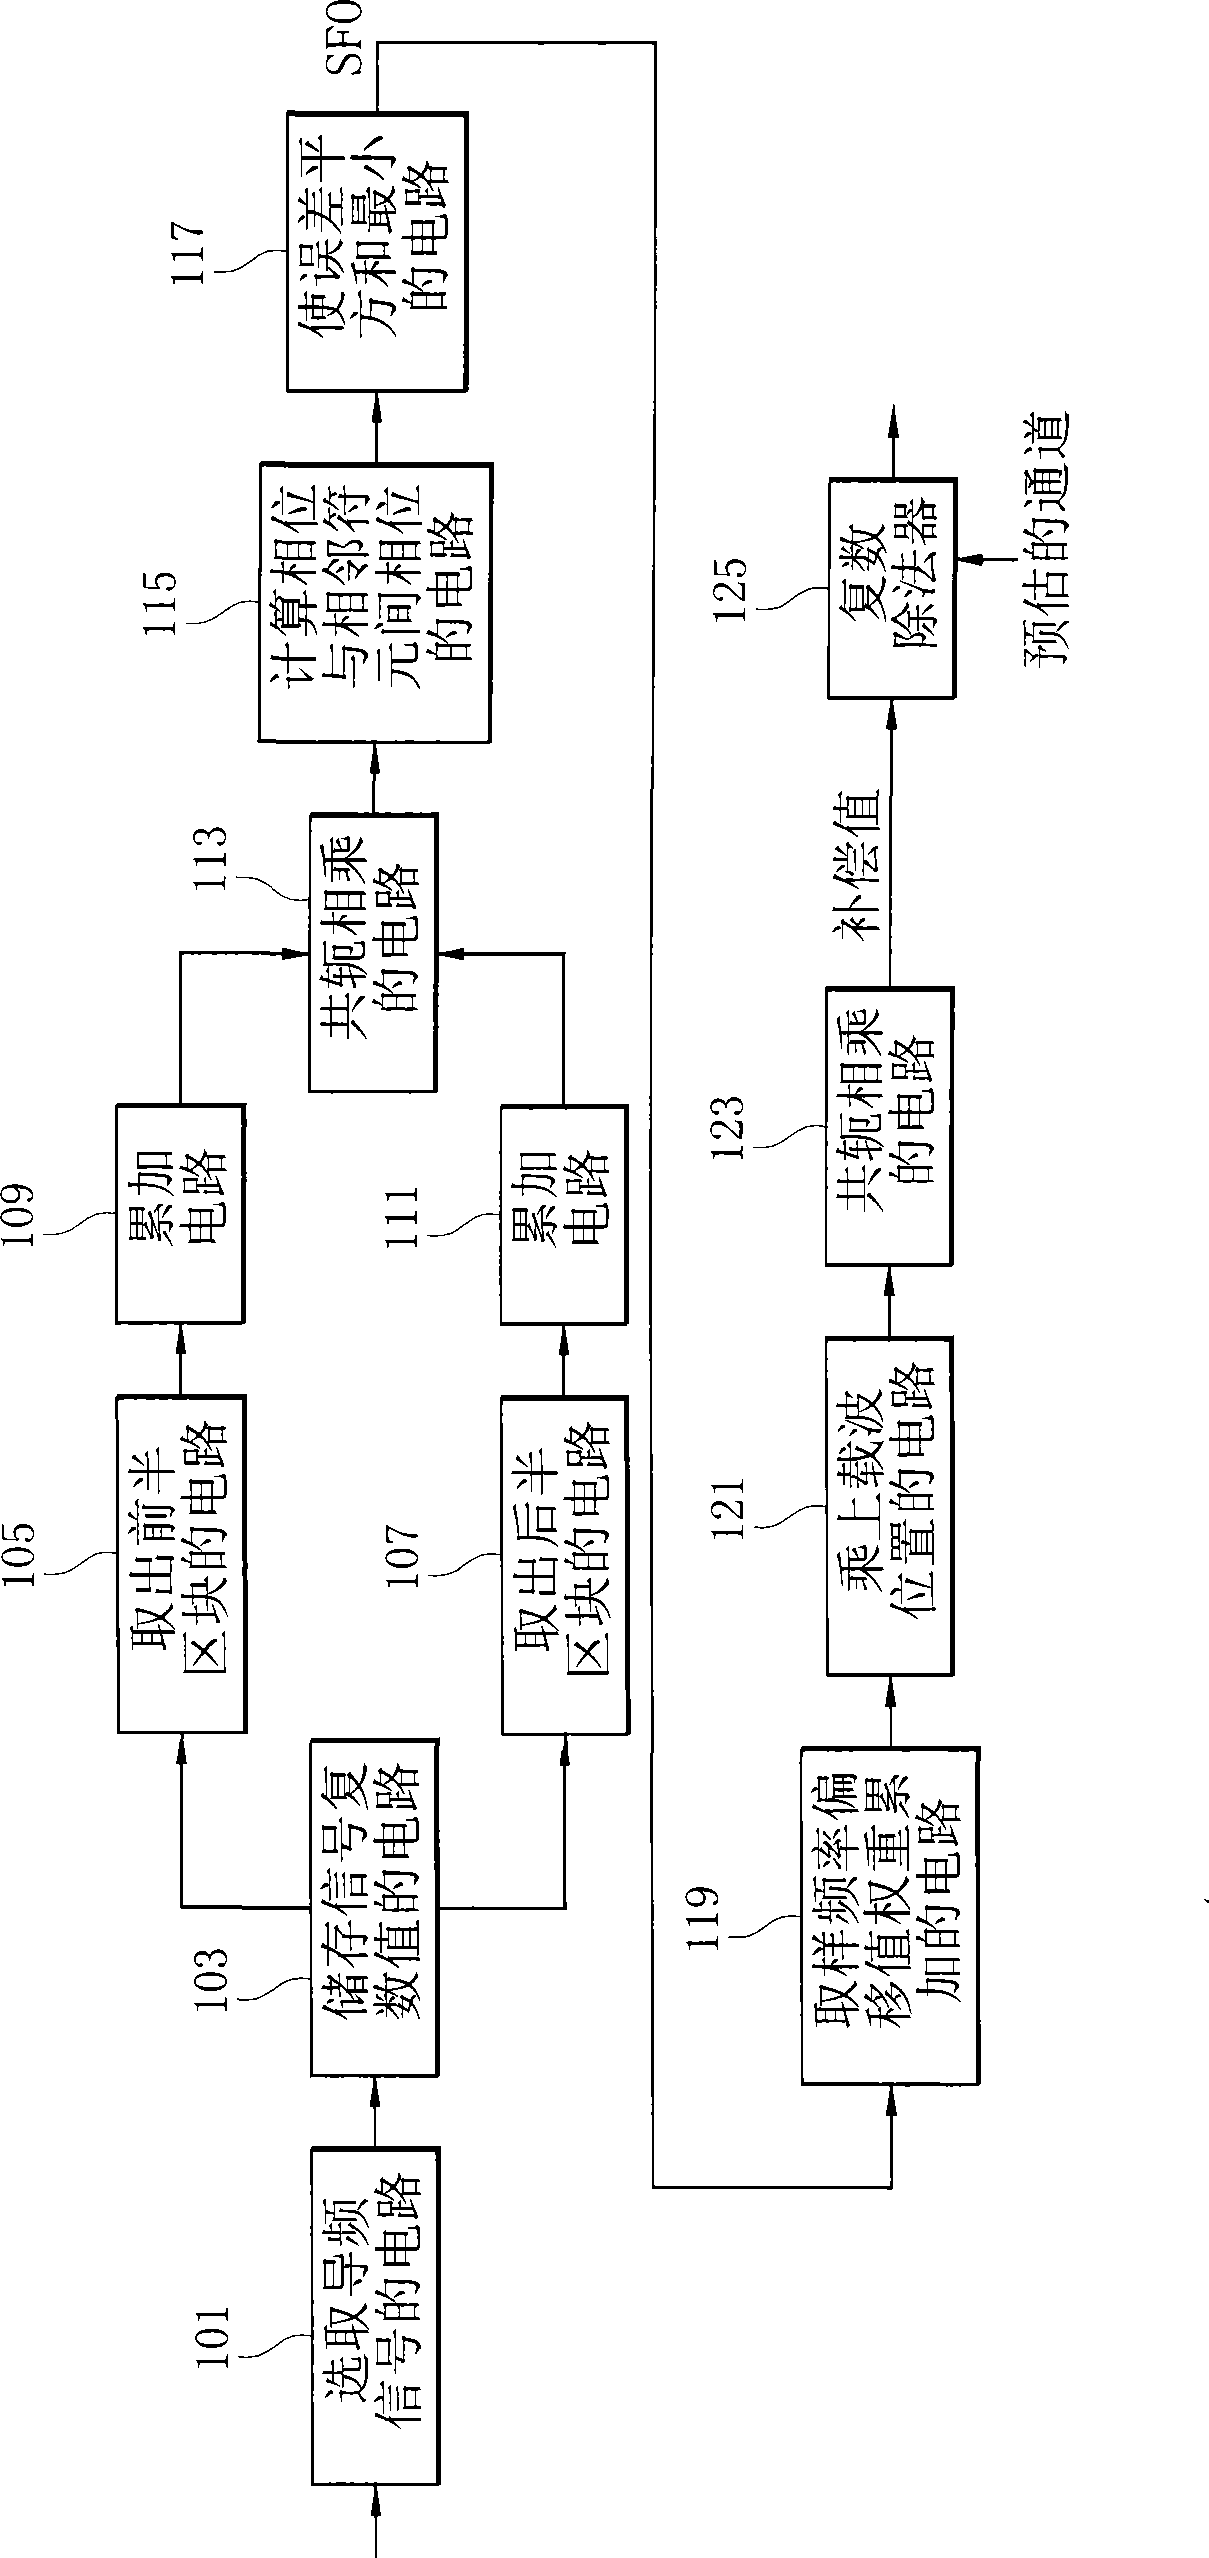 Apparatus and method for estimating and compensating sampling frequency offset